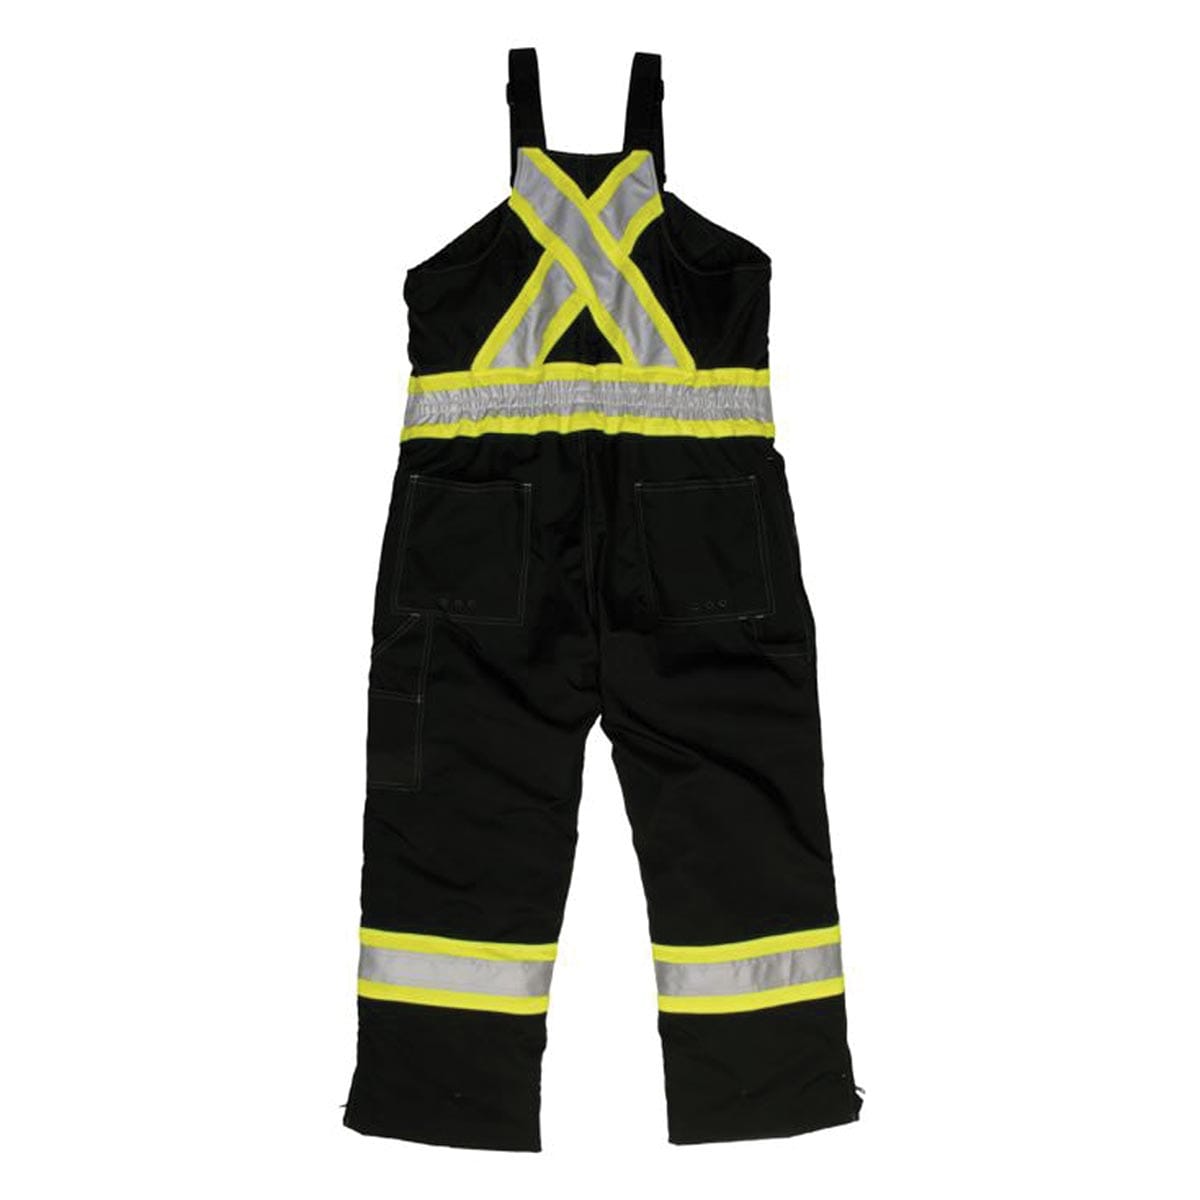 Tough Duck Enhanced Visibility Insulated Ripstop Safety Overall